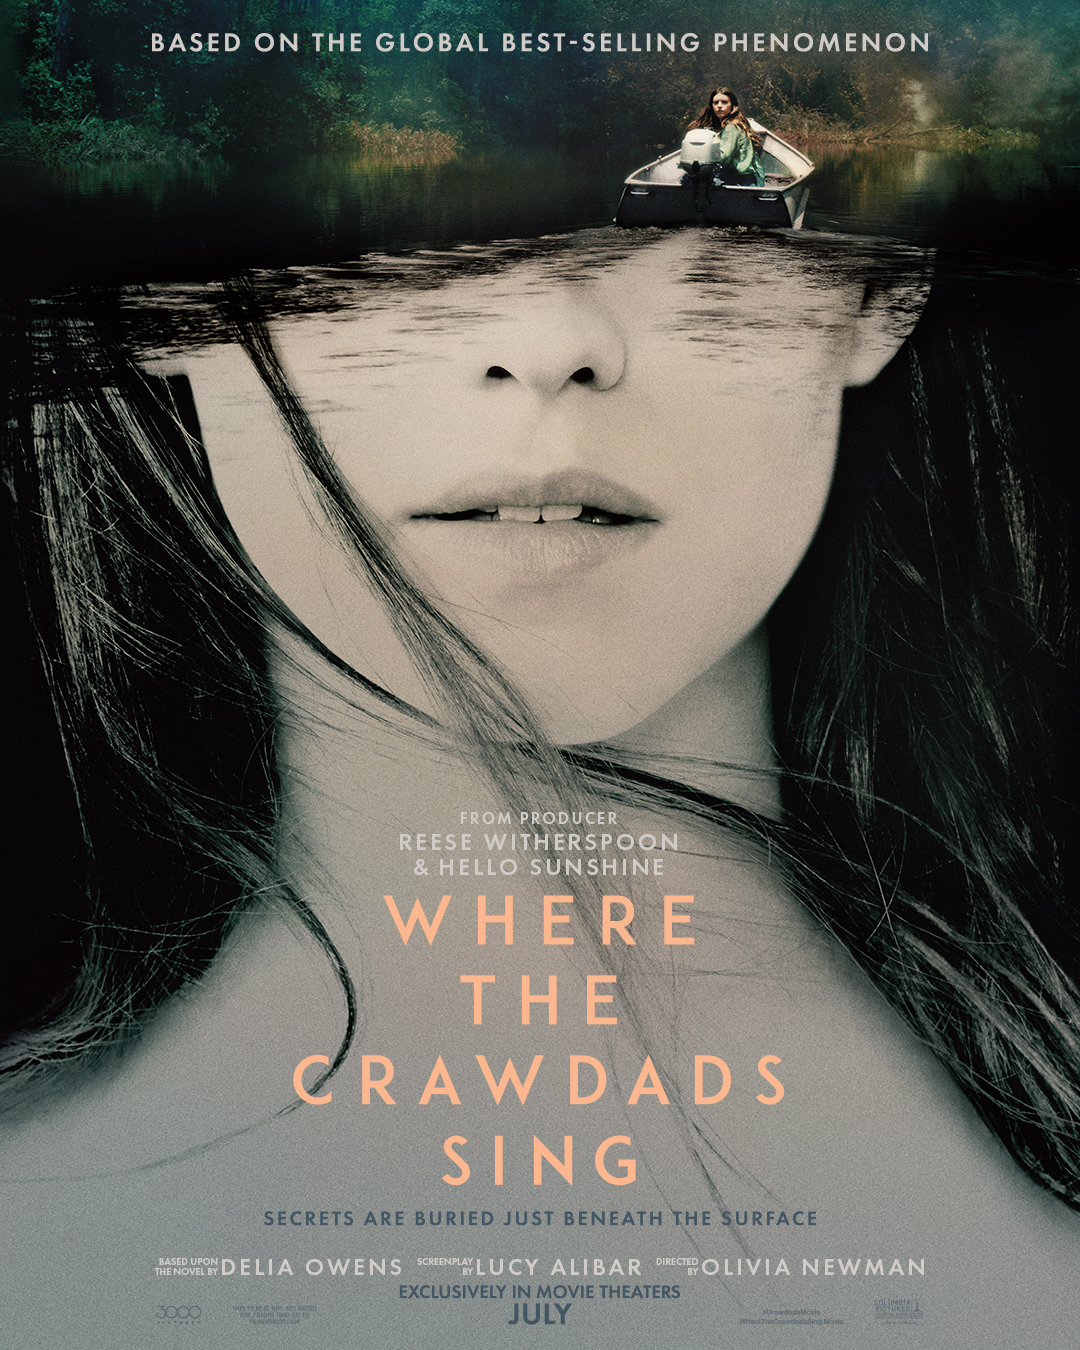 Where the Crawdads Sing at an AMC Theatre near you